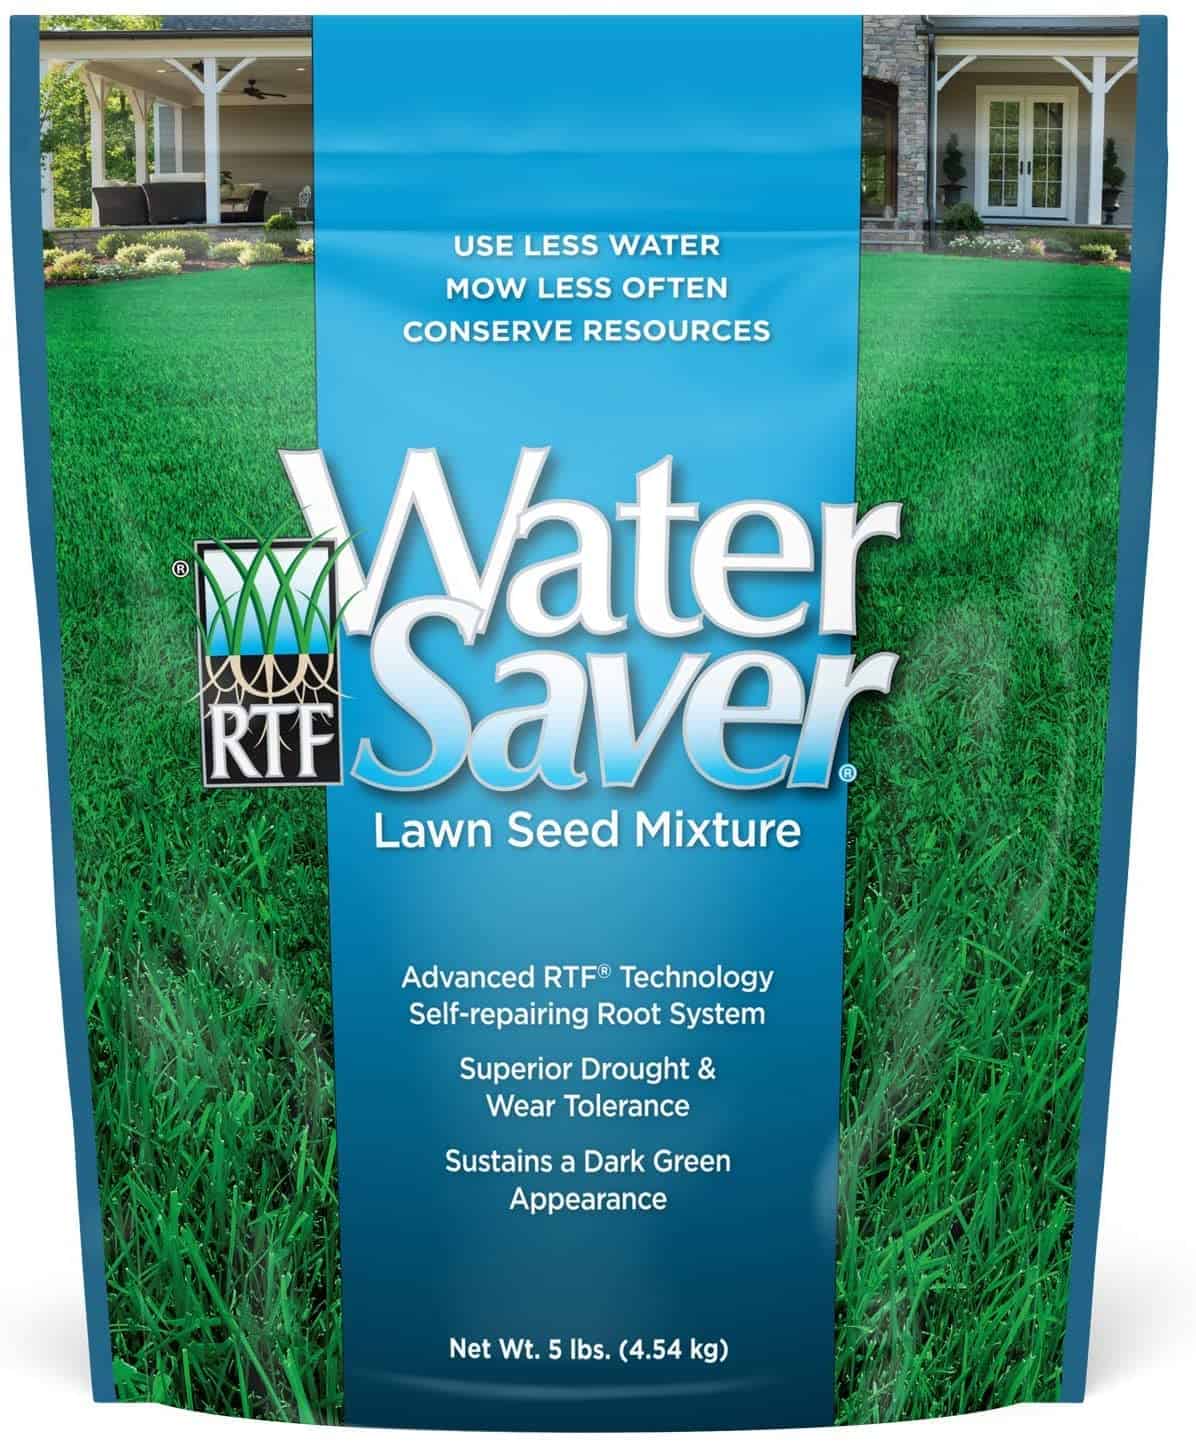 WaterSaver Grass Mixture with Turf-Type Tall Fescue Used to Seed New Lawn and Patch Up Jobs